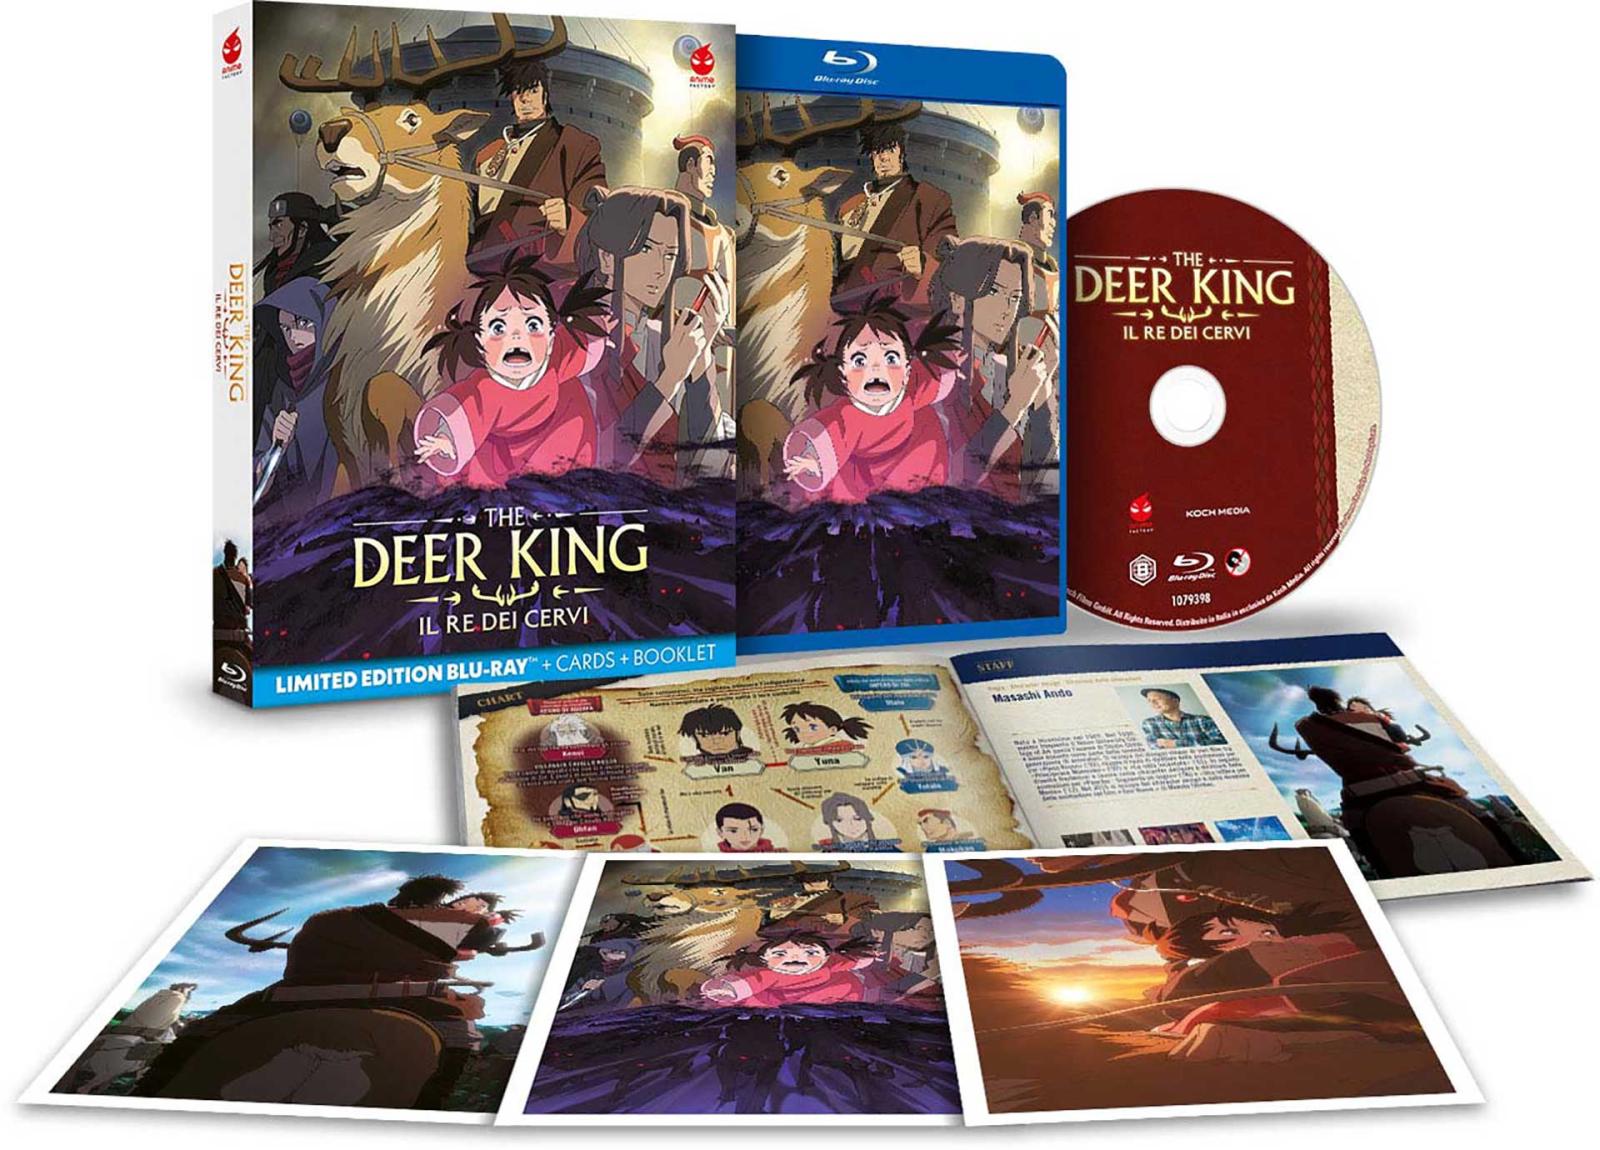 The Deer King - Il Re dei Cervi - Limited Edition Blu-ray + Cards + Booklet (Blu-ray) Thumbnail 4